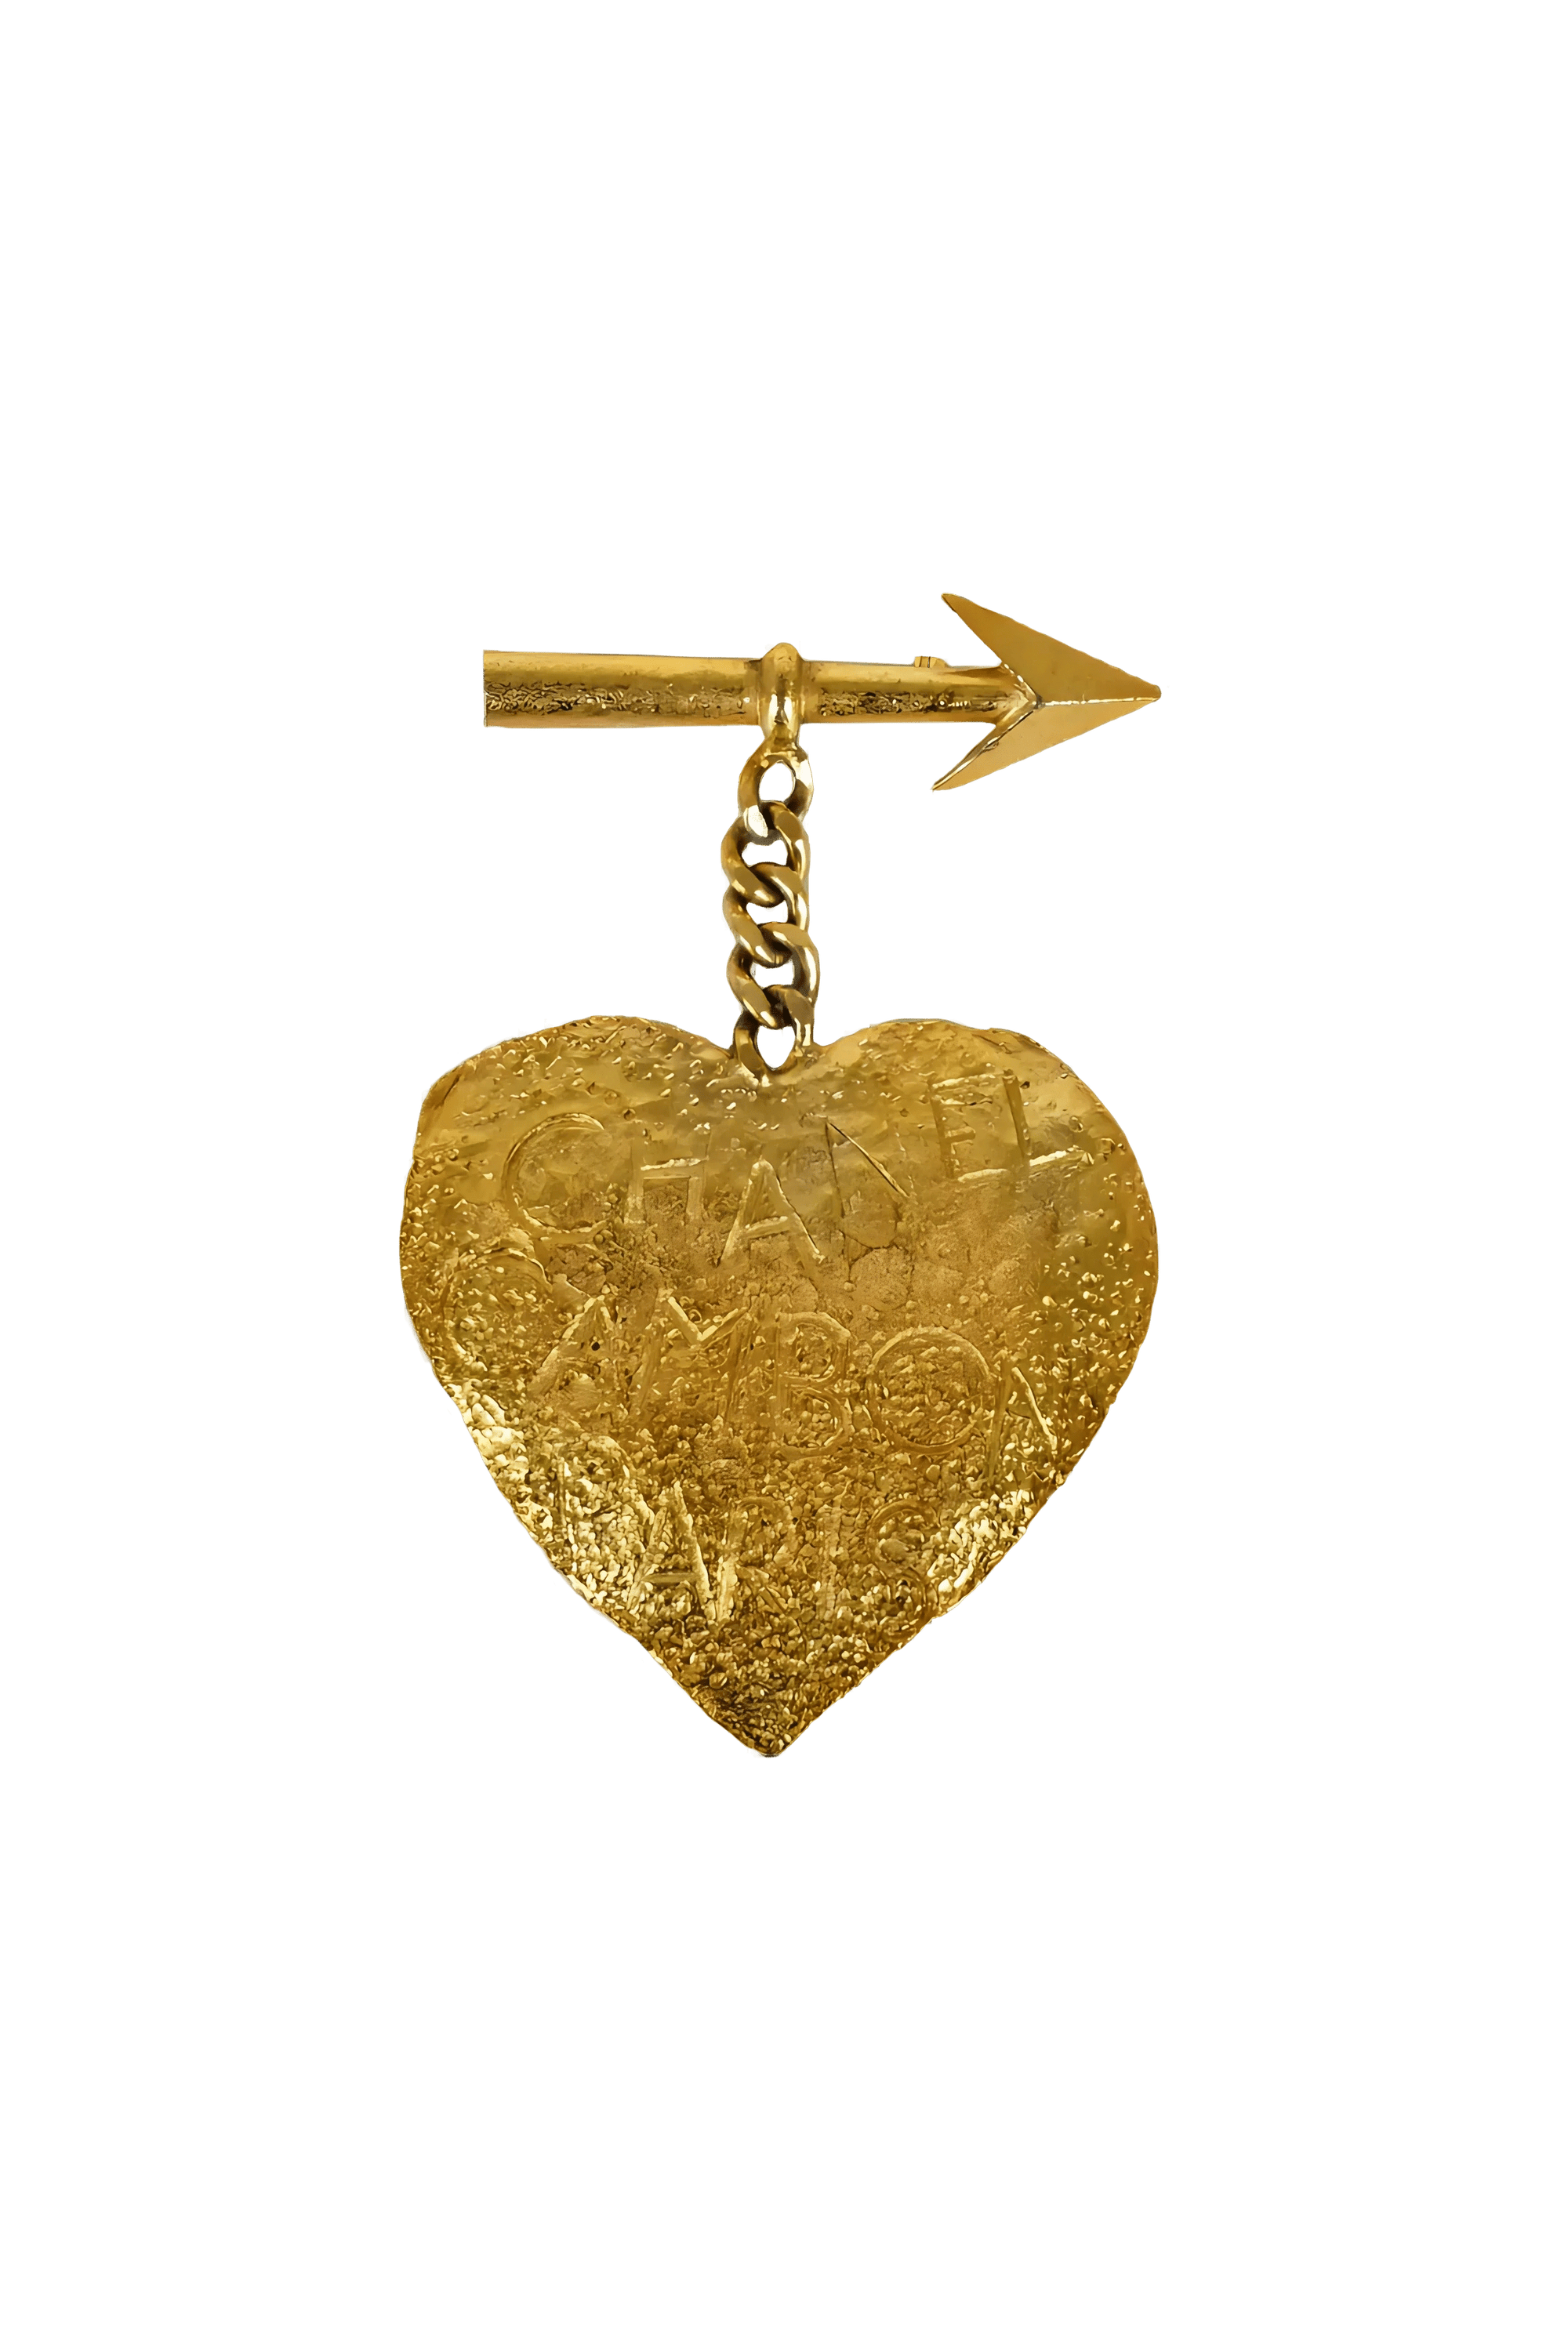 Chanel 24k Gold Plated Heart and Arrow Brooch 1993 P